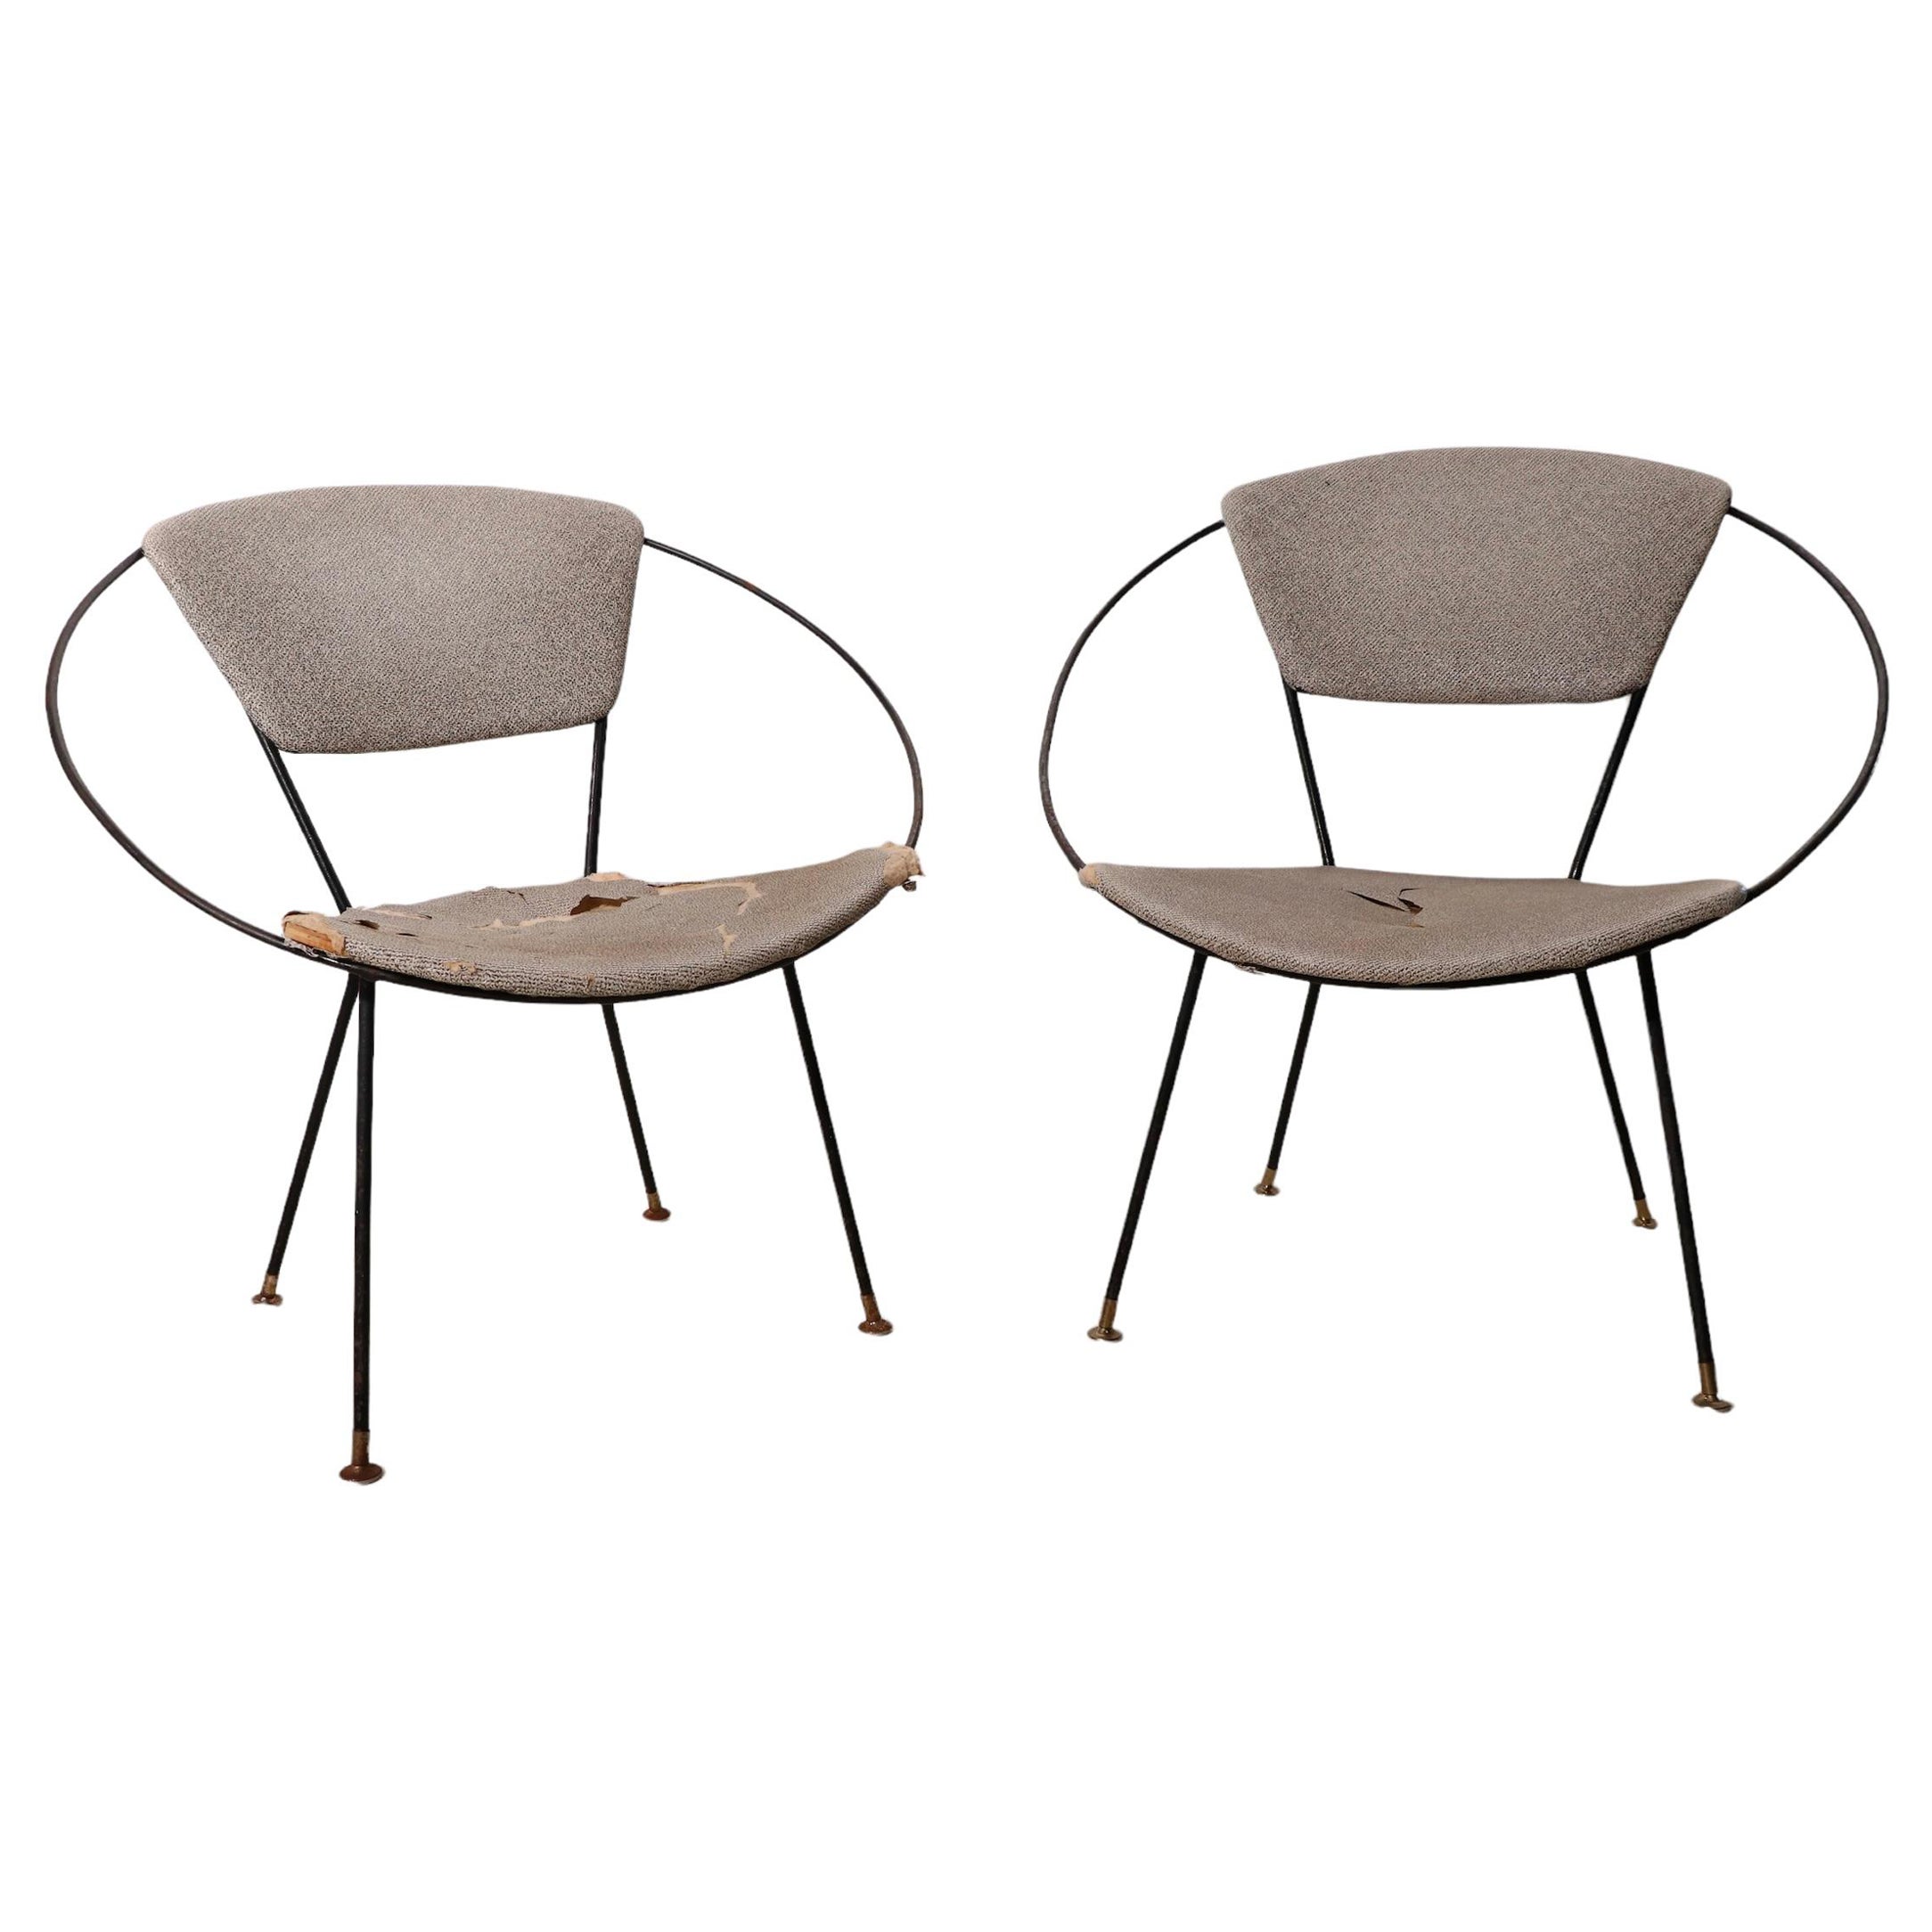 Pr. Wrought Iron Mid Century Hoop Chairs by John Cicchelli for Riley Wolff 1950s For Sale